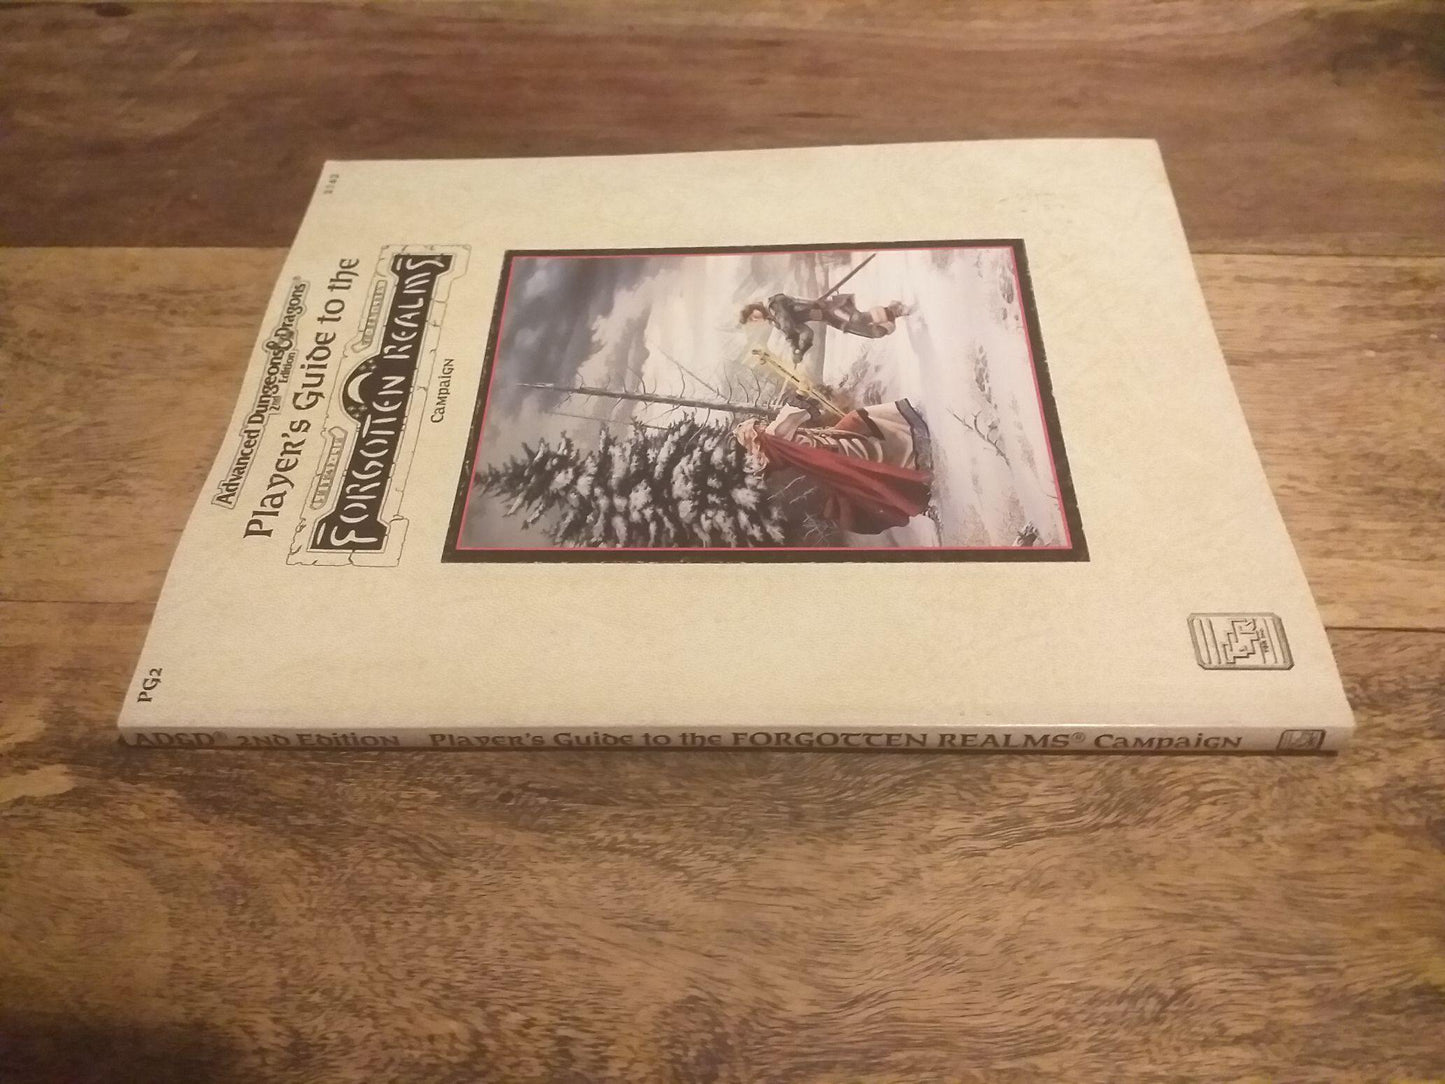 Player’s guide to the forgotten realms campaign Dungeons & Dragons AD&D TSR - books